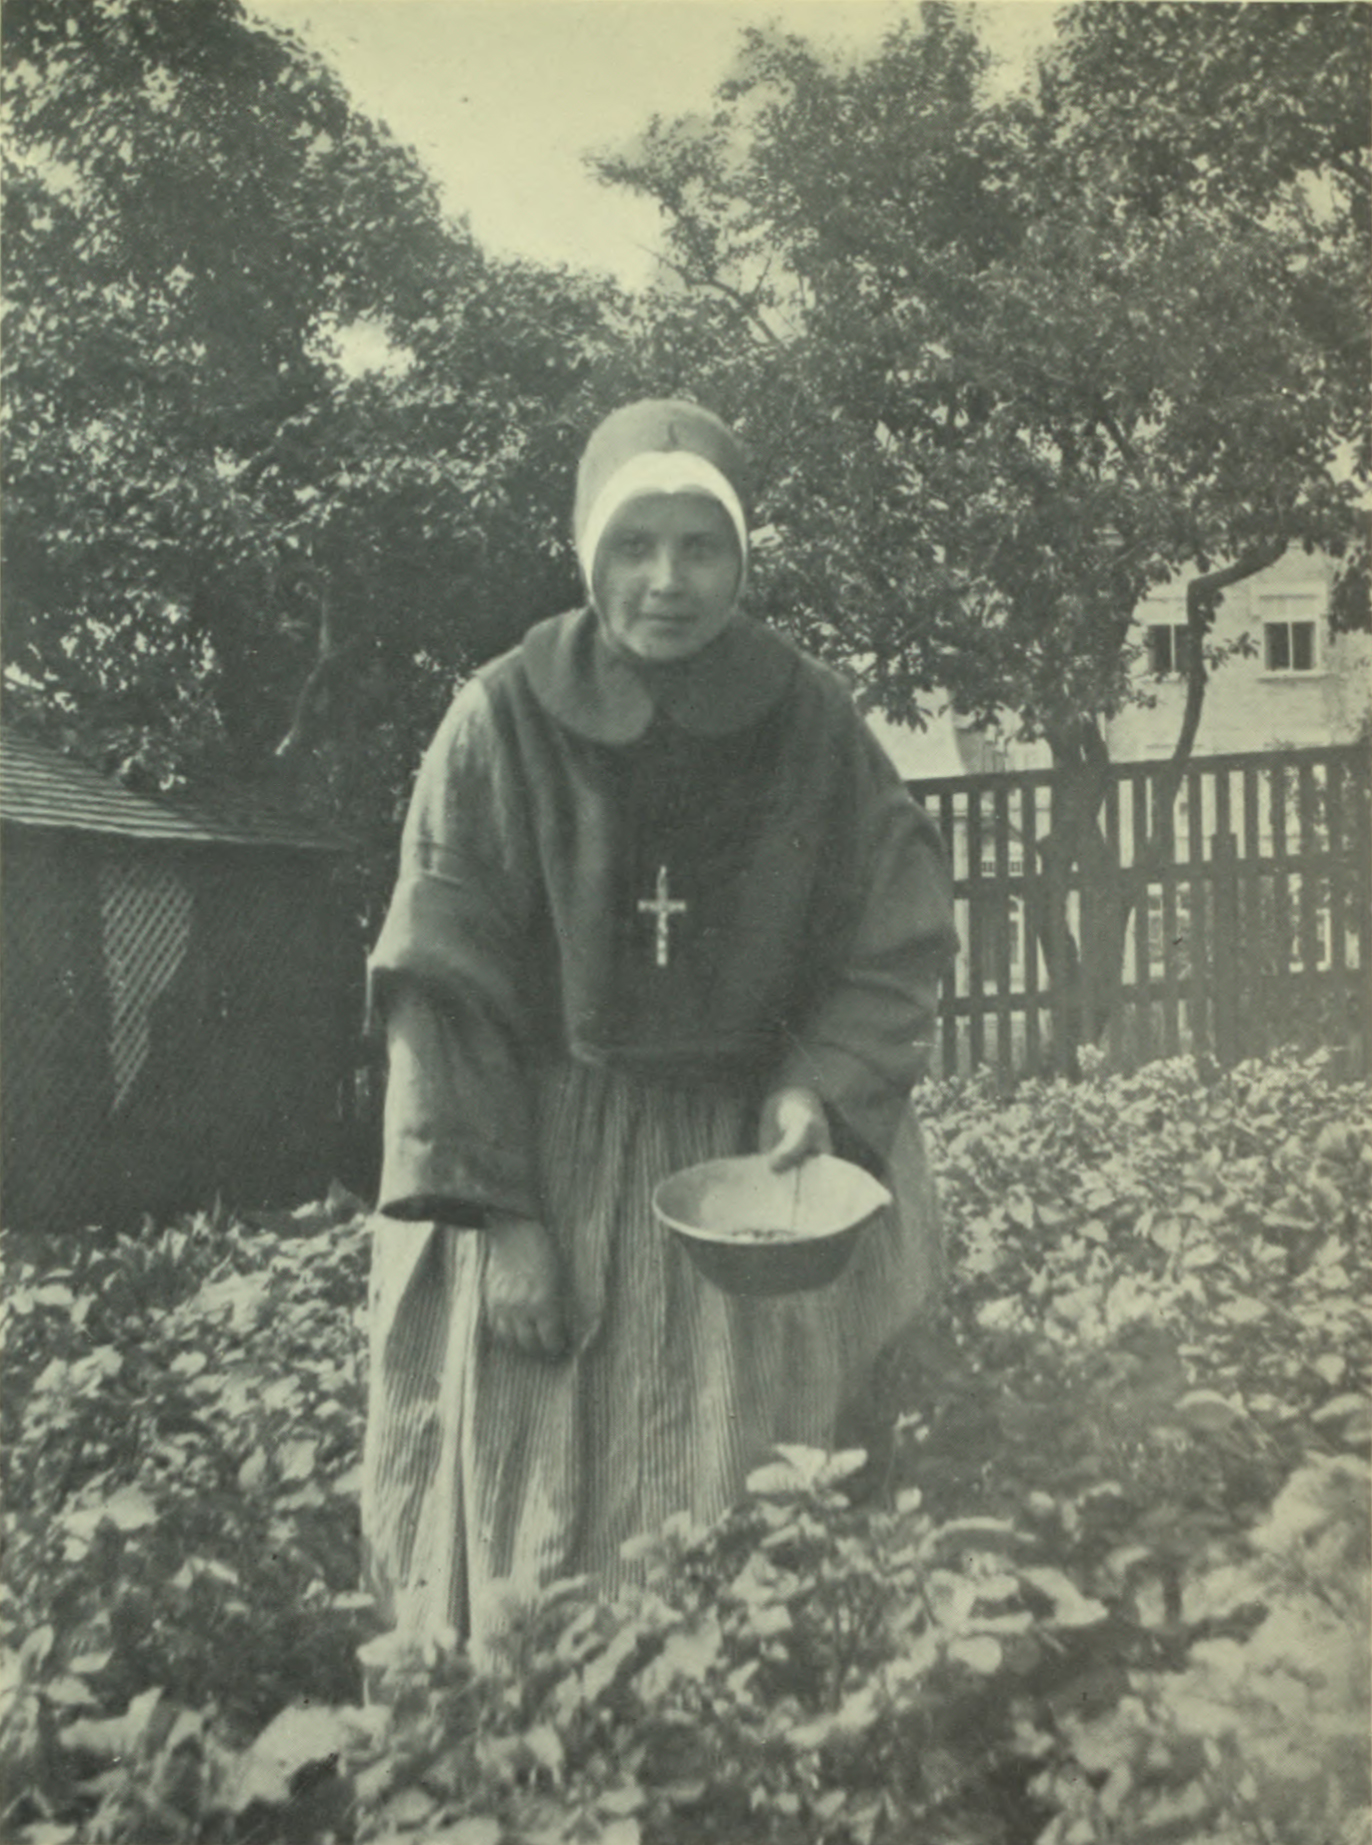 Nun in habit with a bowl, gathering something from the garden.